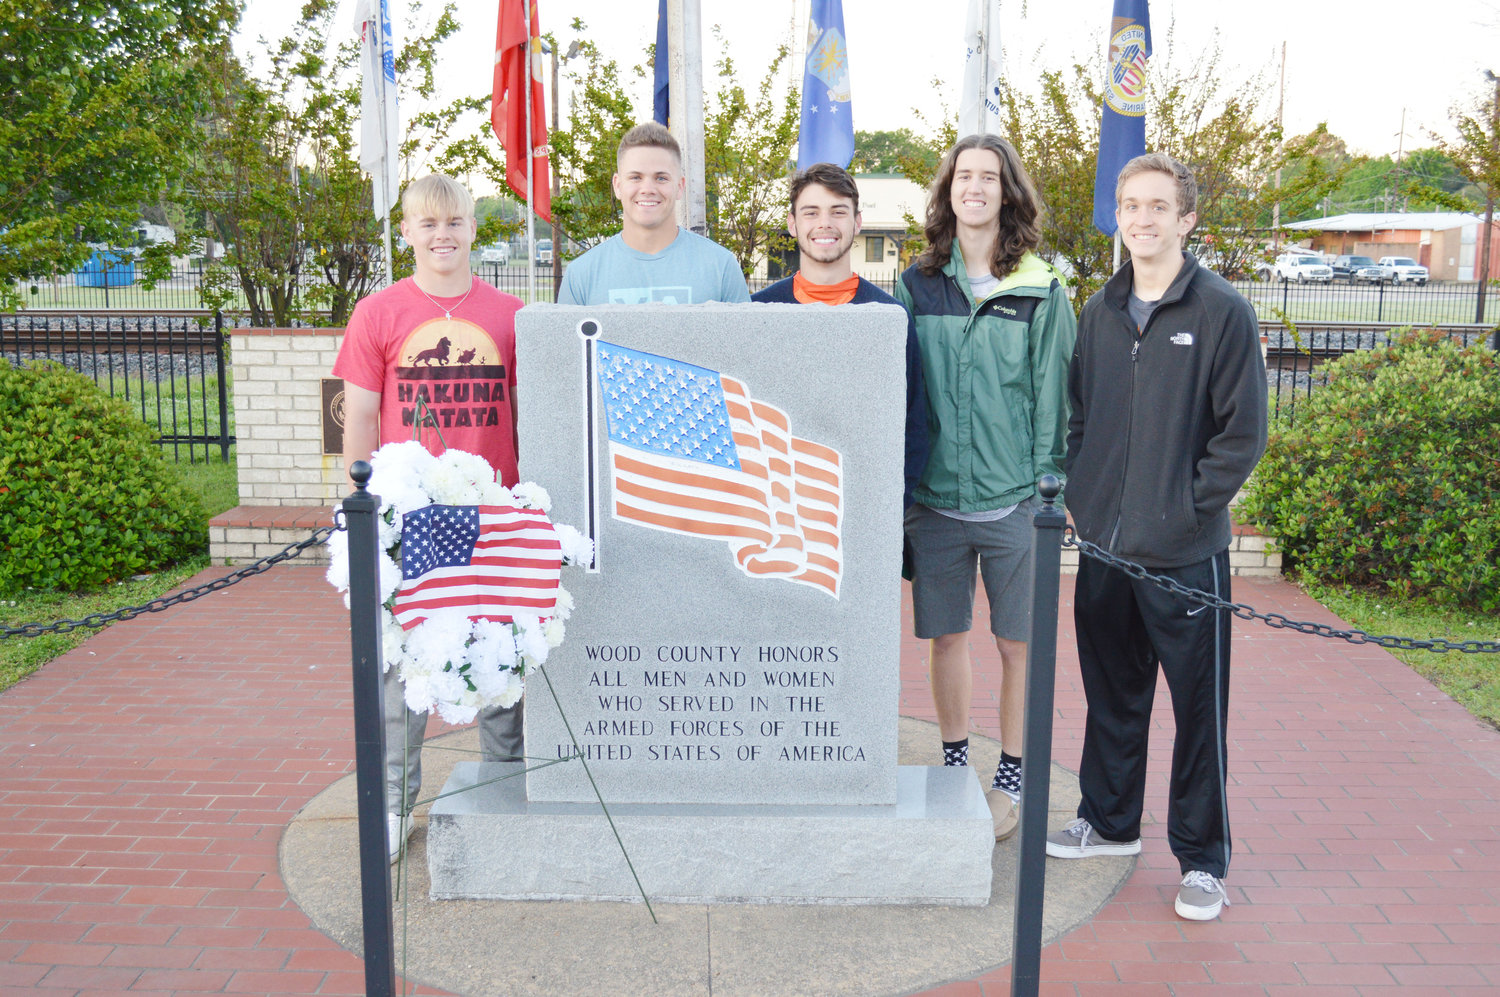 The Junior Historians placed a wreath at the Veterans Memorial Thursday honoring the centennial of the nation’s entry into World War I. The Mineola casualty list includes George M. Abney, Adolphus Gaspard Busby, James Madison Carroll, Luckett White Cochran, David Claud Harry, Cody Bill Johnson, Harry Strickland and Benjamin Earnest Veitch. The eight doughboys were killed in action in France or died from injuries received in France. The Junior Historians are Seth Hudgins, Aaron Stanford, Dalton Harris, Austin Witt and Cameron Sorenson. The group is planning a Memorial Day ceremony, “Remembering the Great War,” at noon, May 29 at St. Dunstan’s Episcopal Church. (Photo courtesy Jim Phillips)